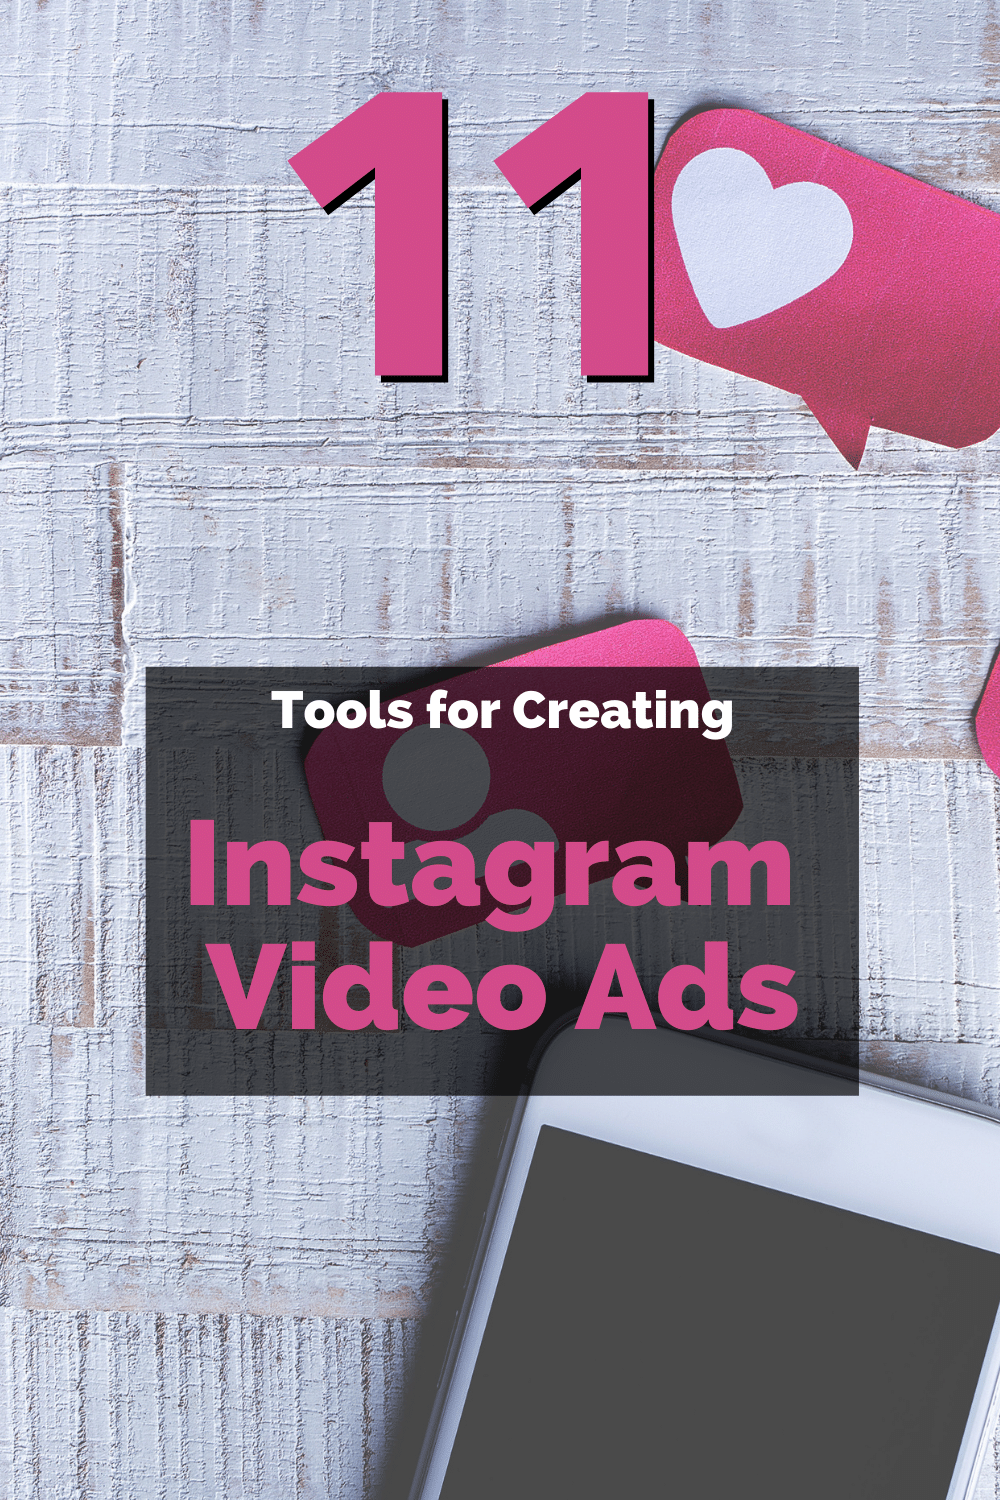 11 Tools for Creating Instagram Video Ads